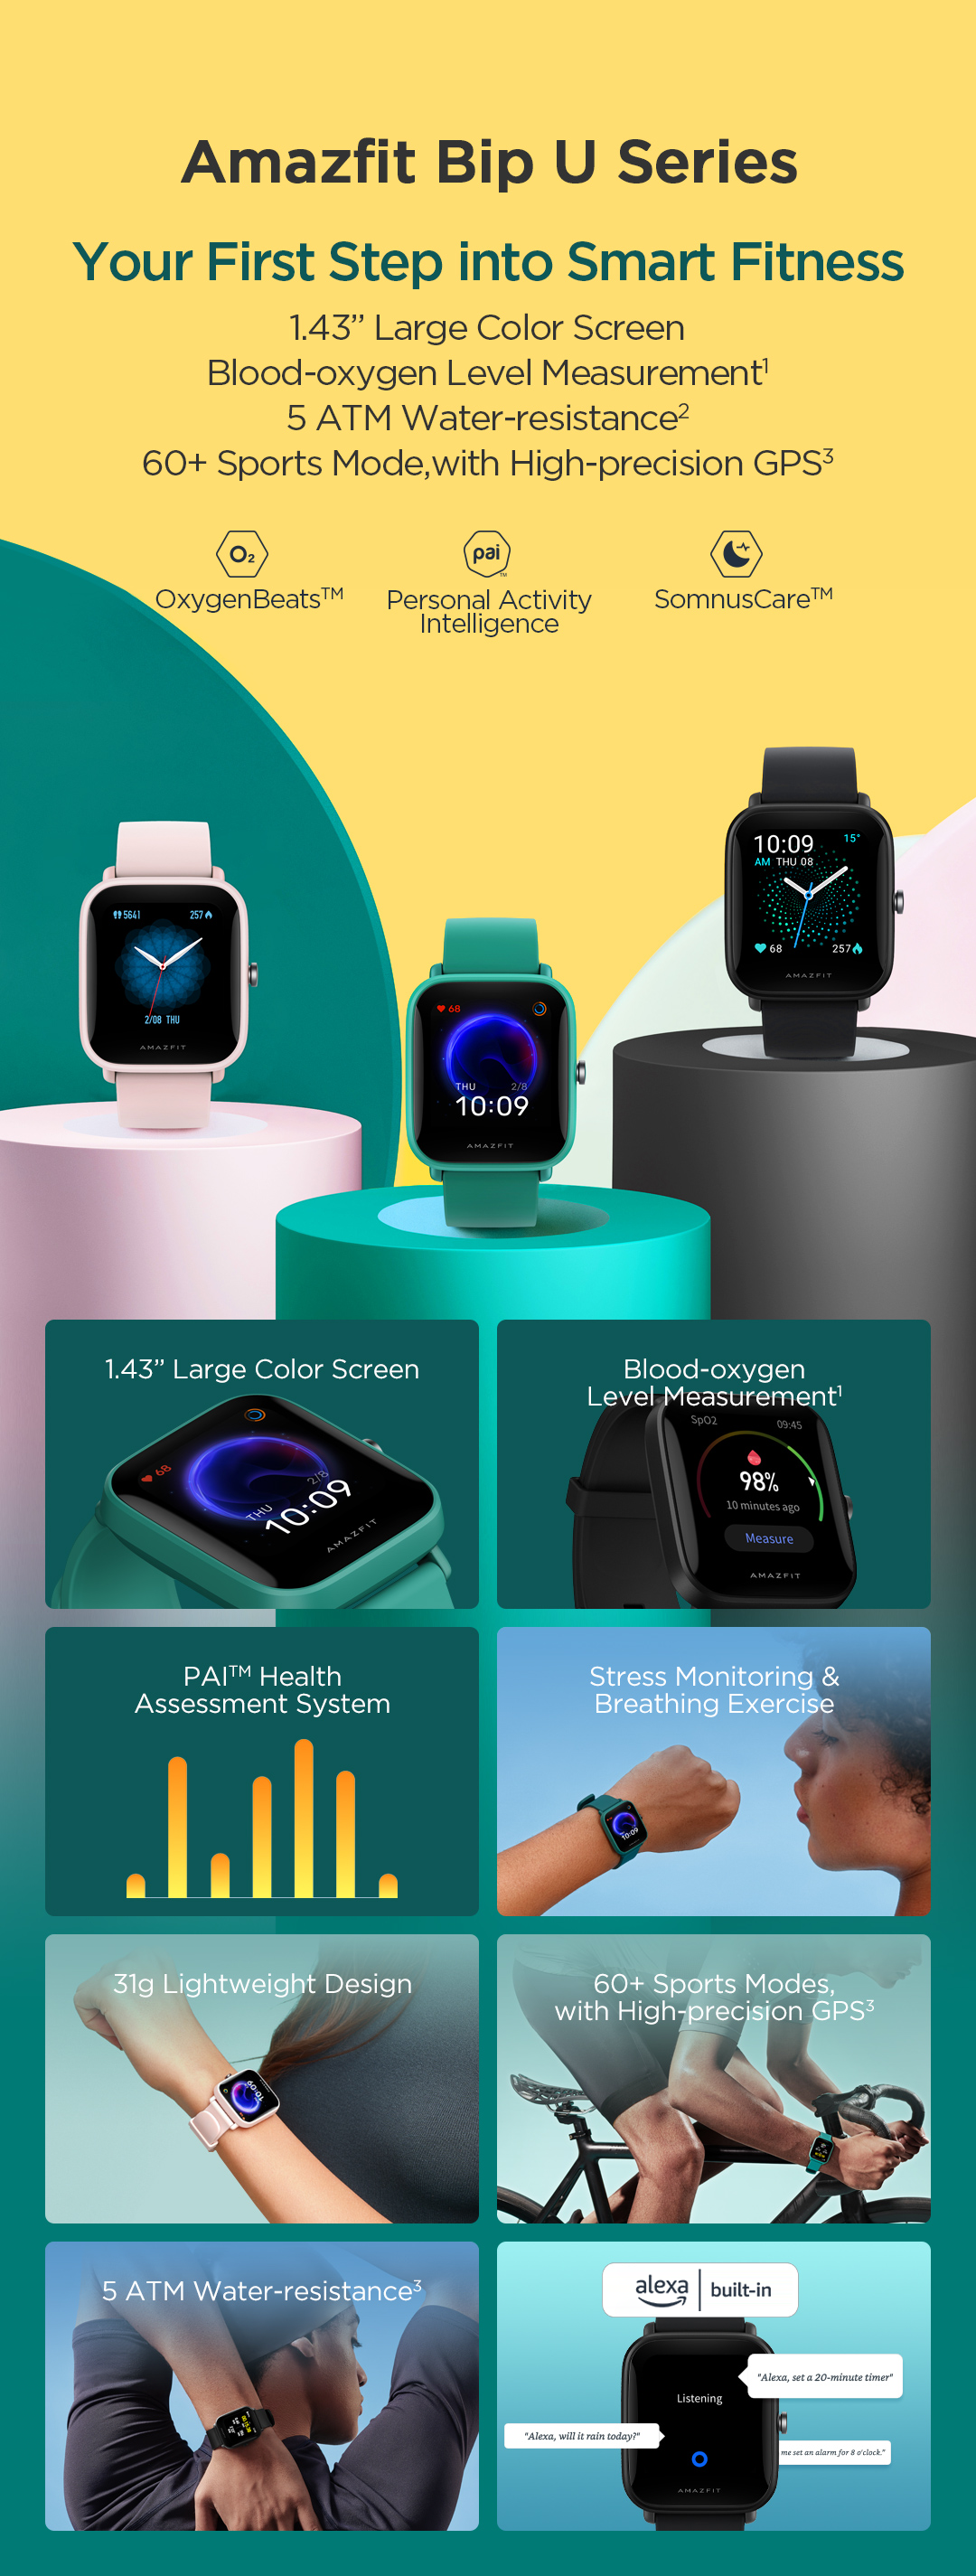 Amazfit Bip U | Your First Step Into Smart Fitness